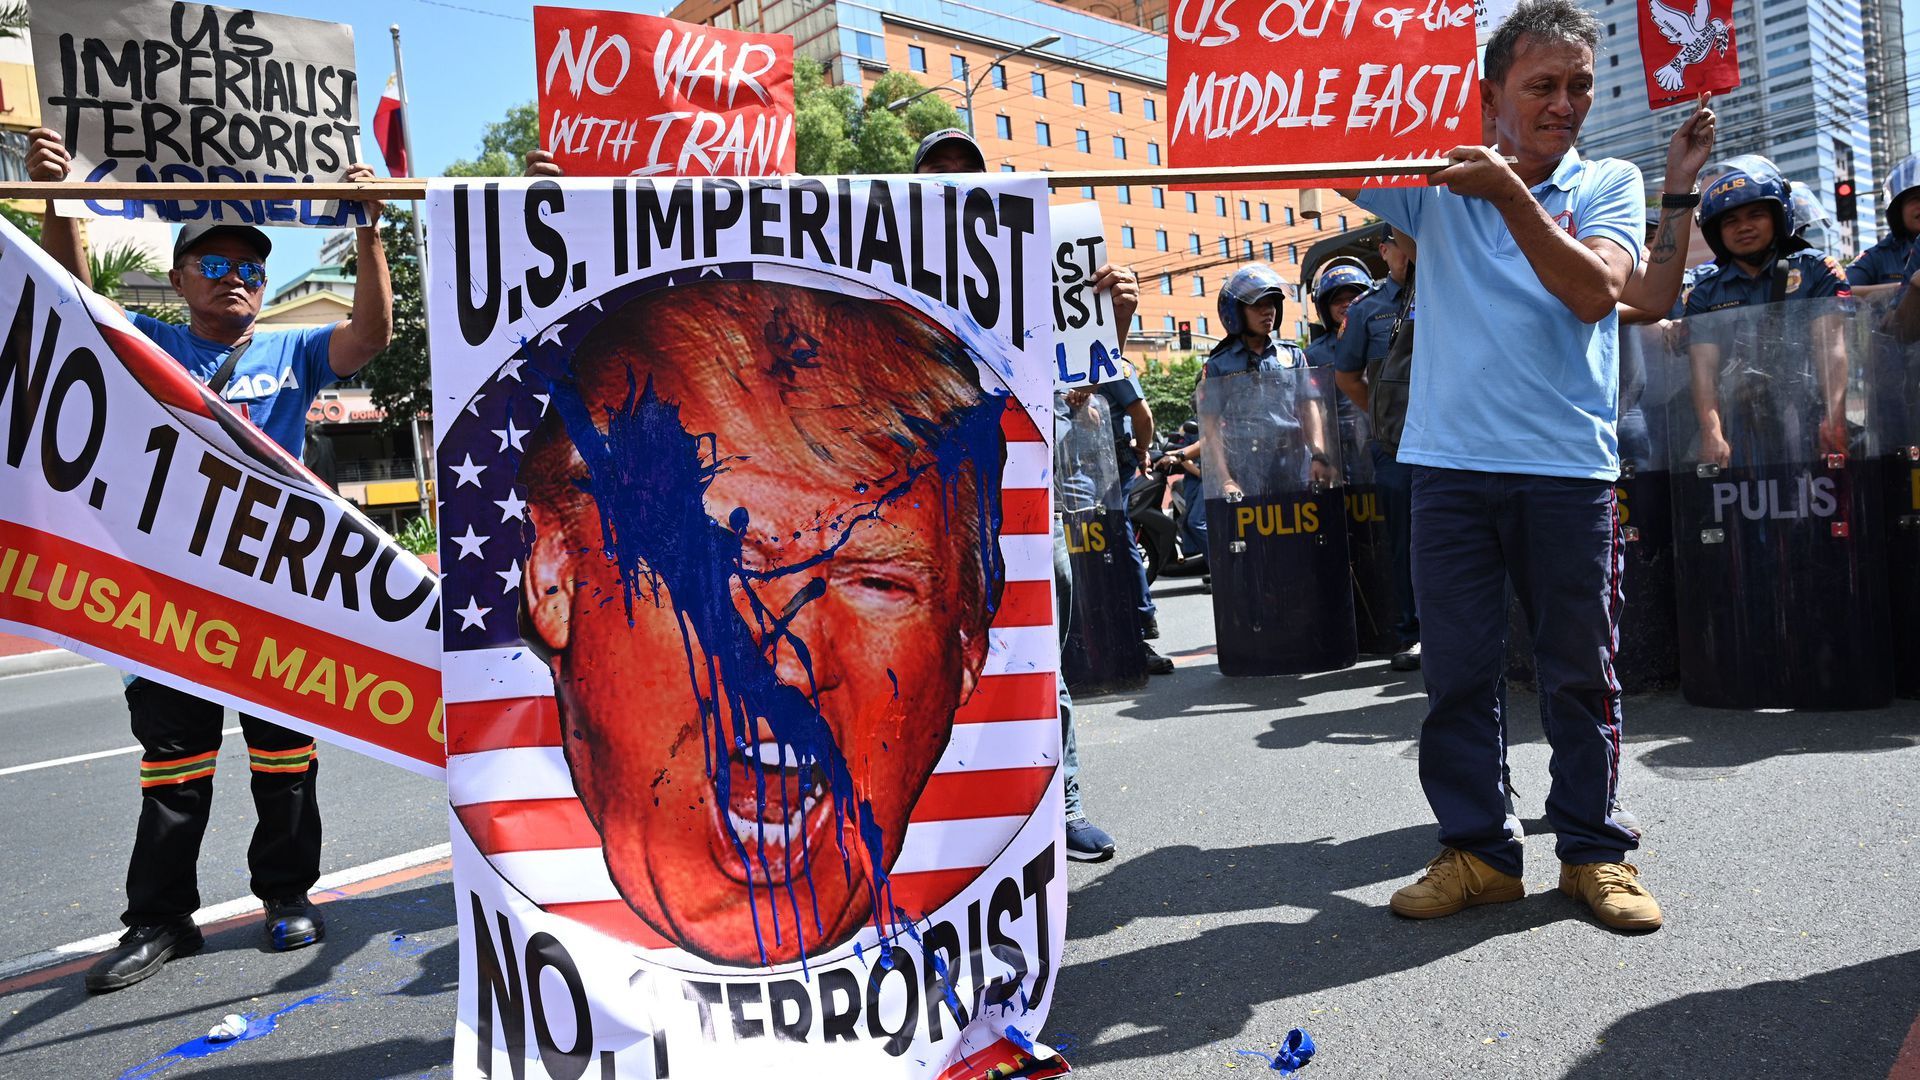 Protesters have taken to the streets all over the world to object to U.S. actions